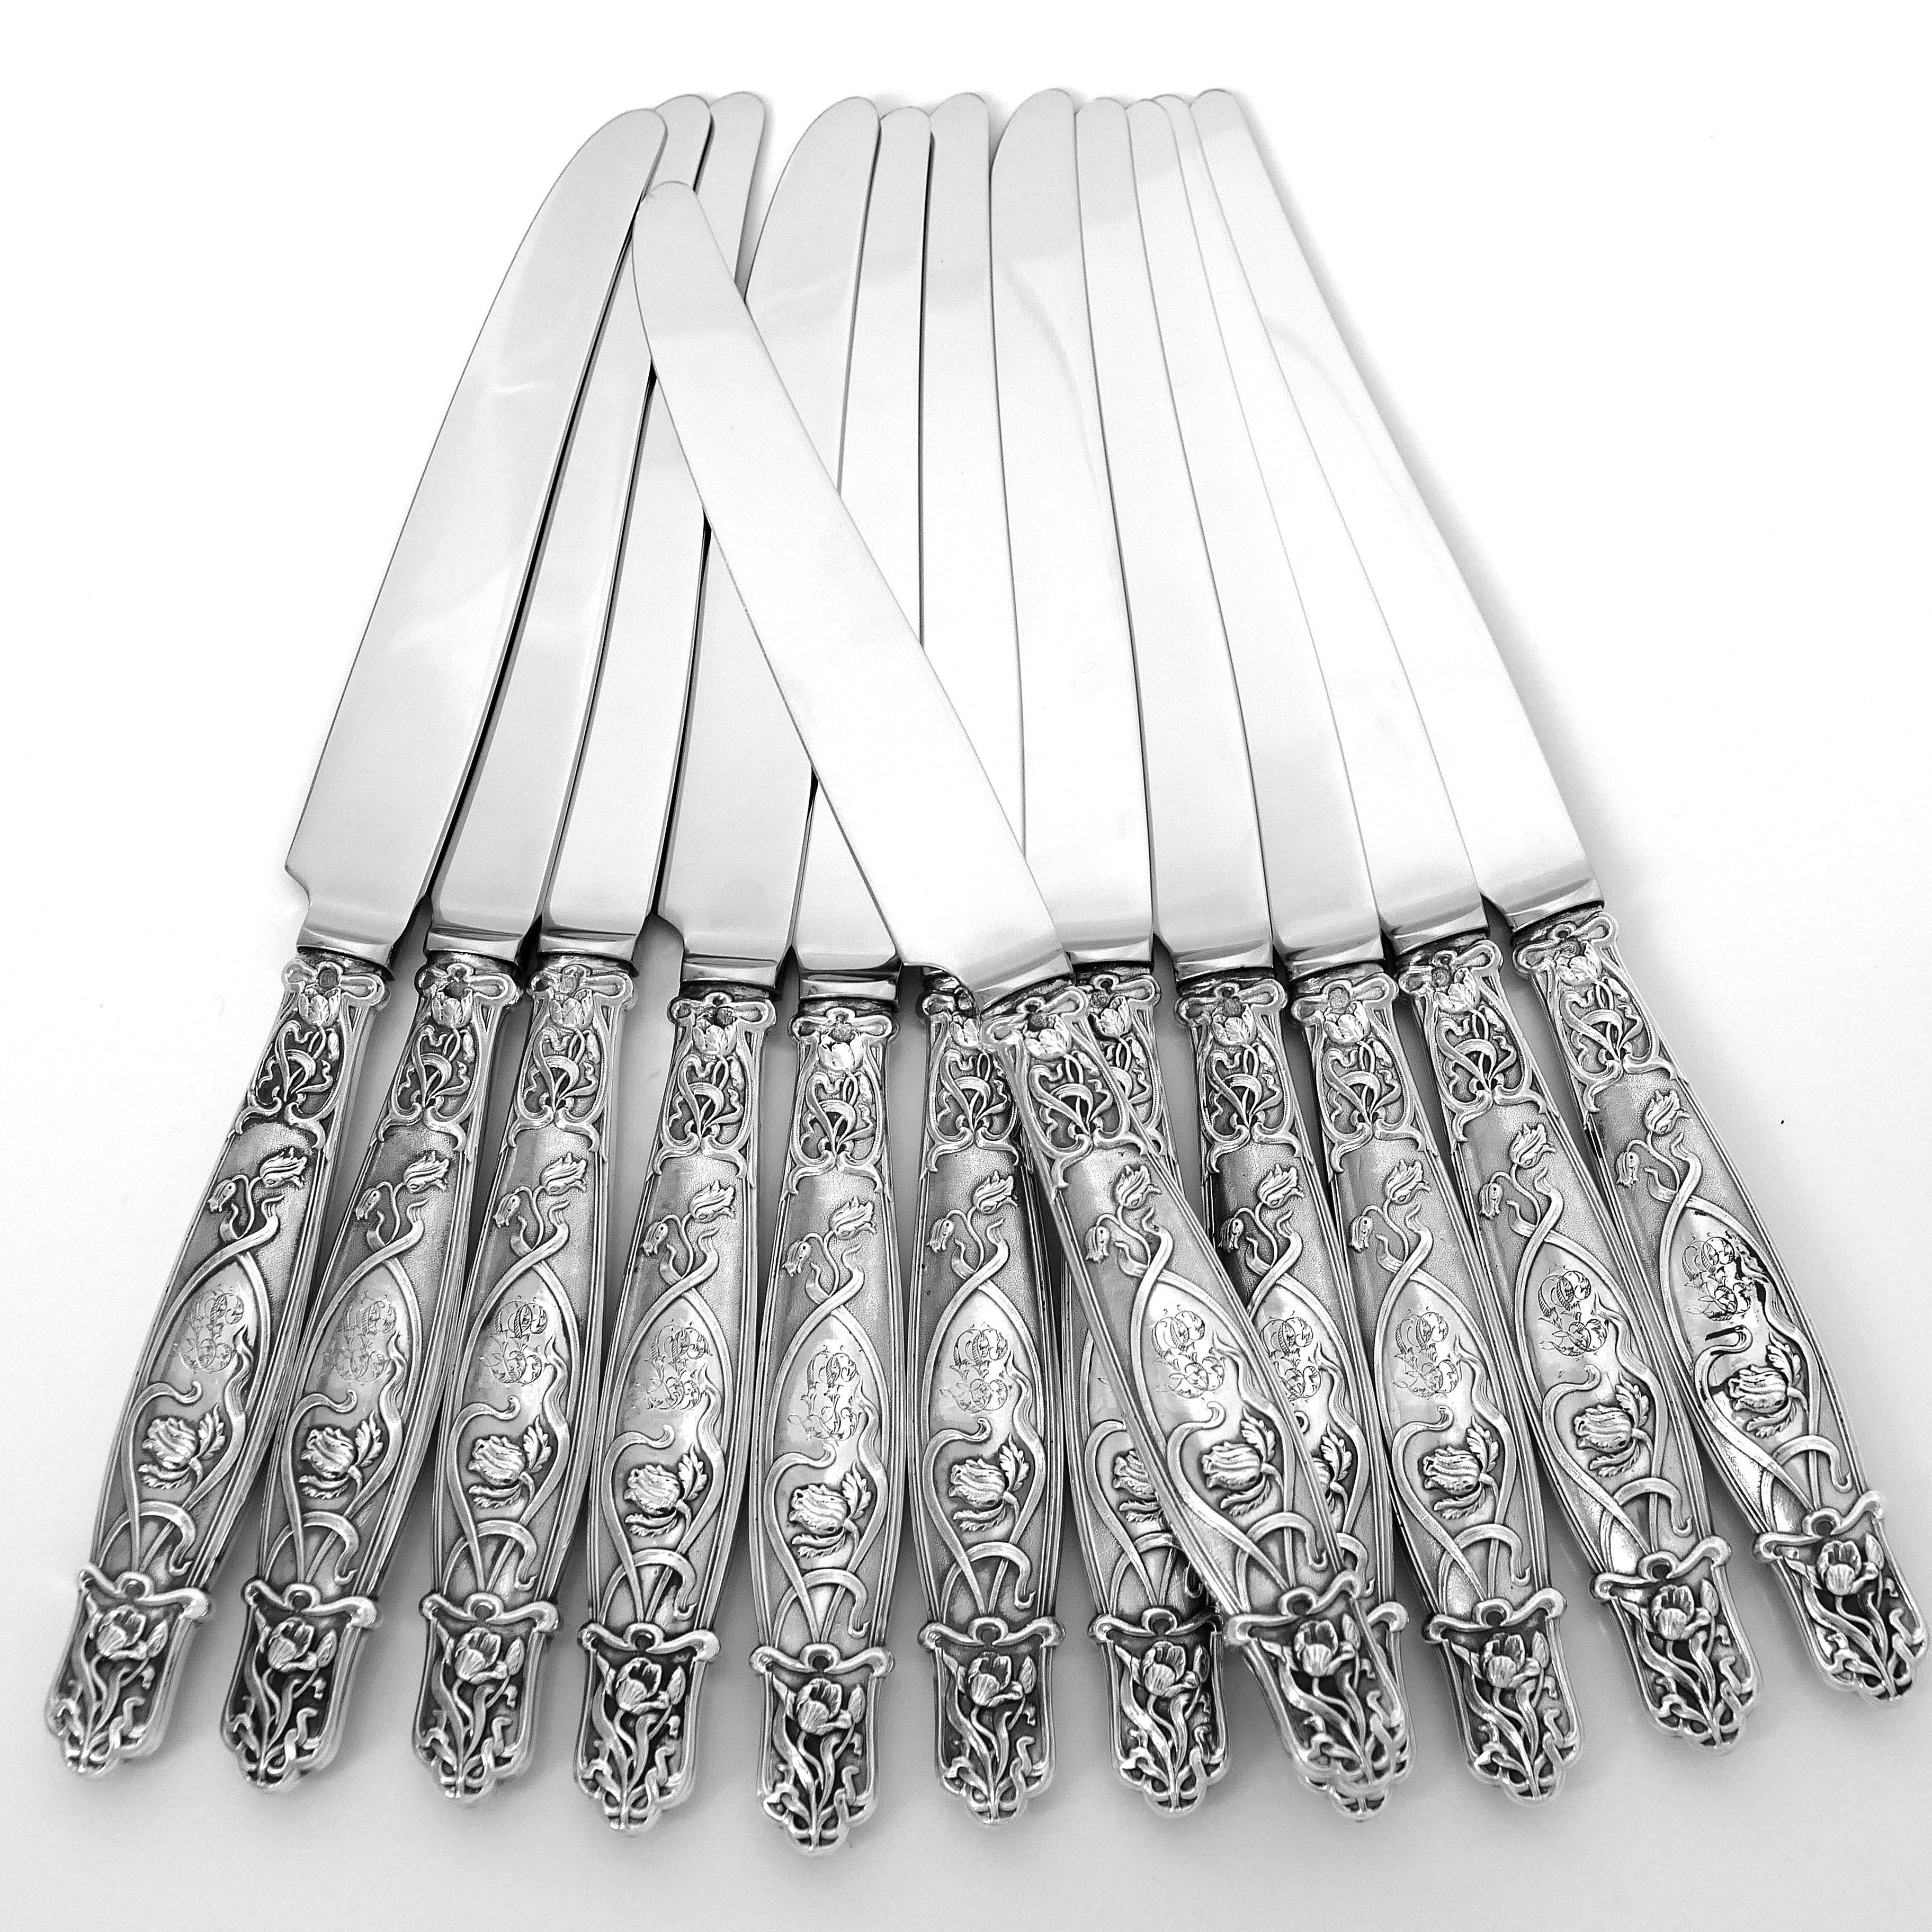 Rare French Sterling Silver Dinner Knife Set 12 Pc, Poppie, New Stainless Blades 5